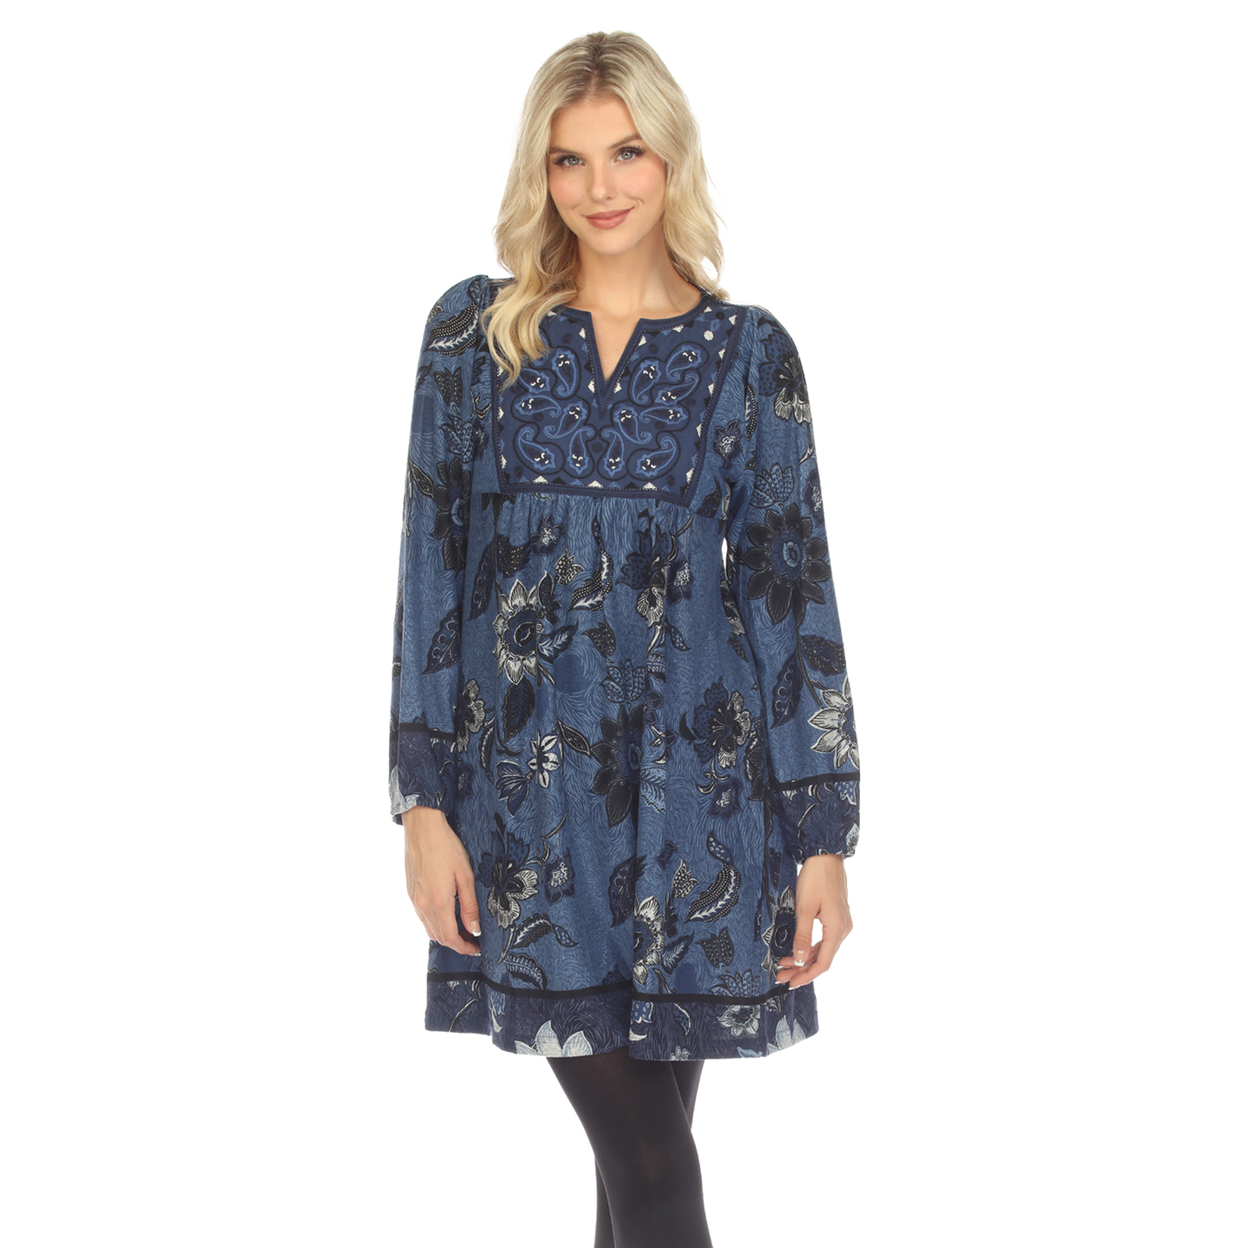 White Mark Women's Floral Paisley Sweater Dress - Blue, Small